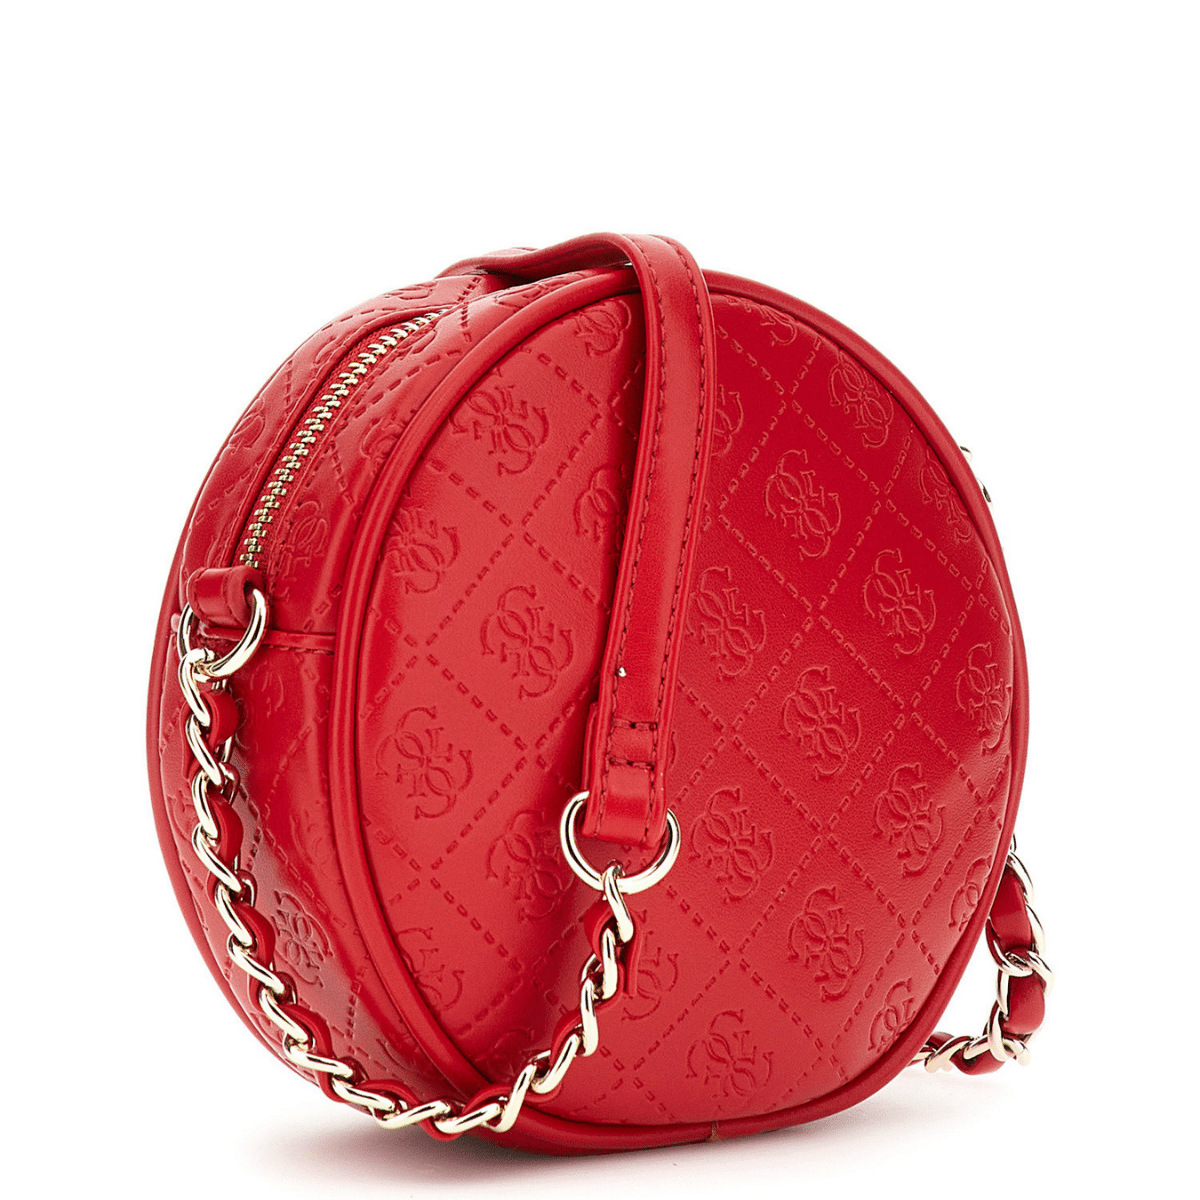 Guess girls red round handbag with gold chain strap back